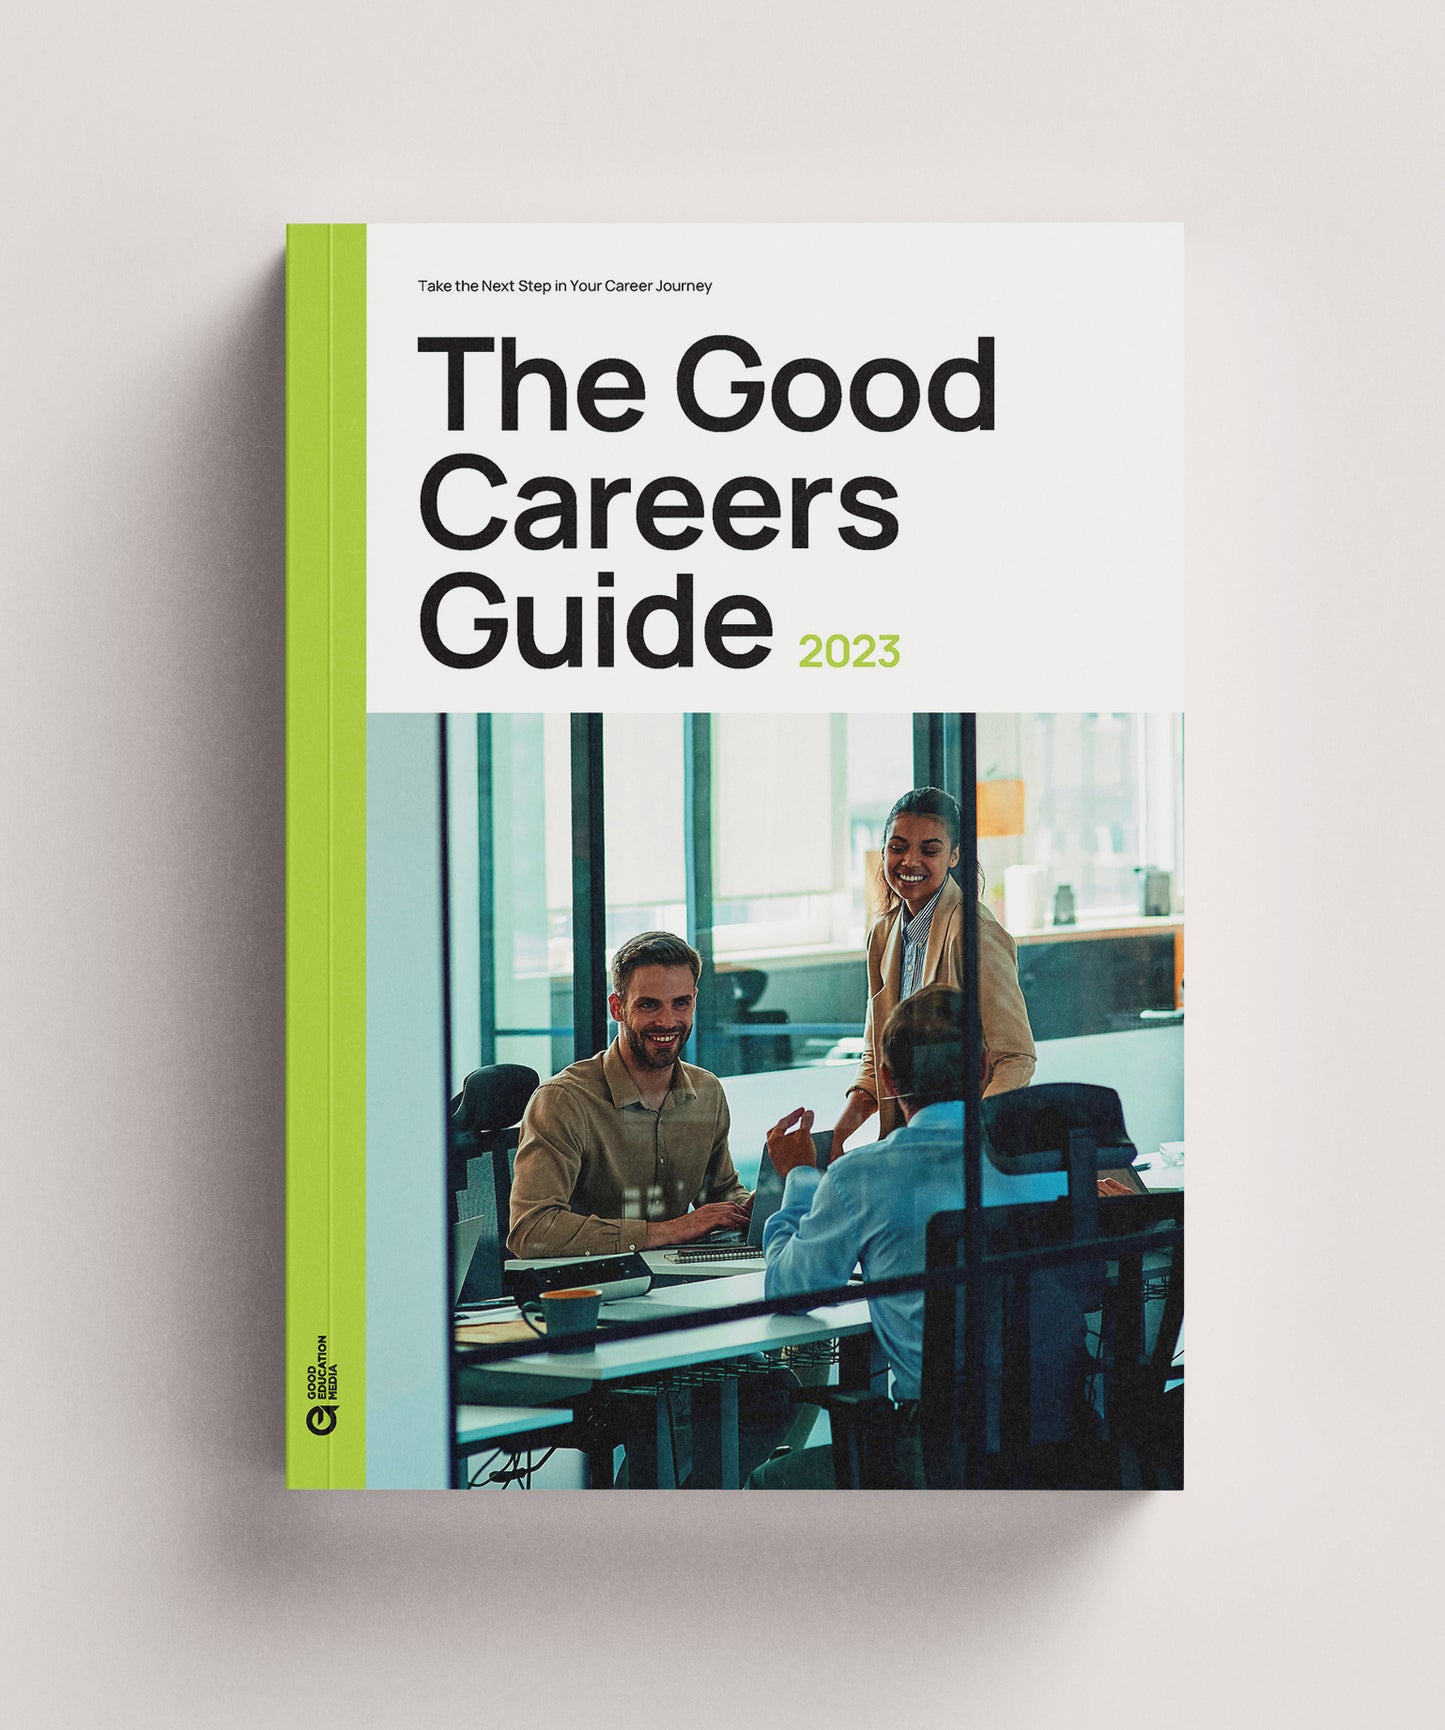 The Good Careers Guide and The Good Universities Guide 2023 Flip Book